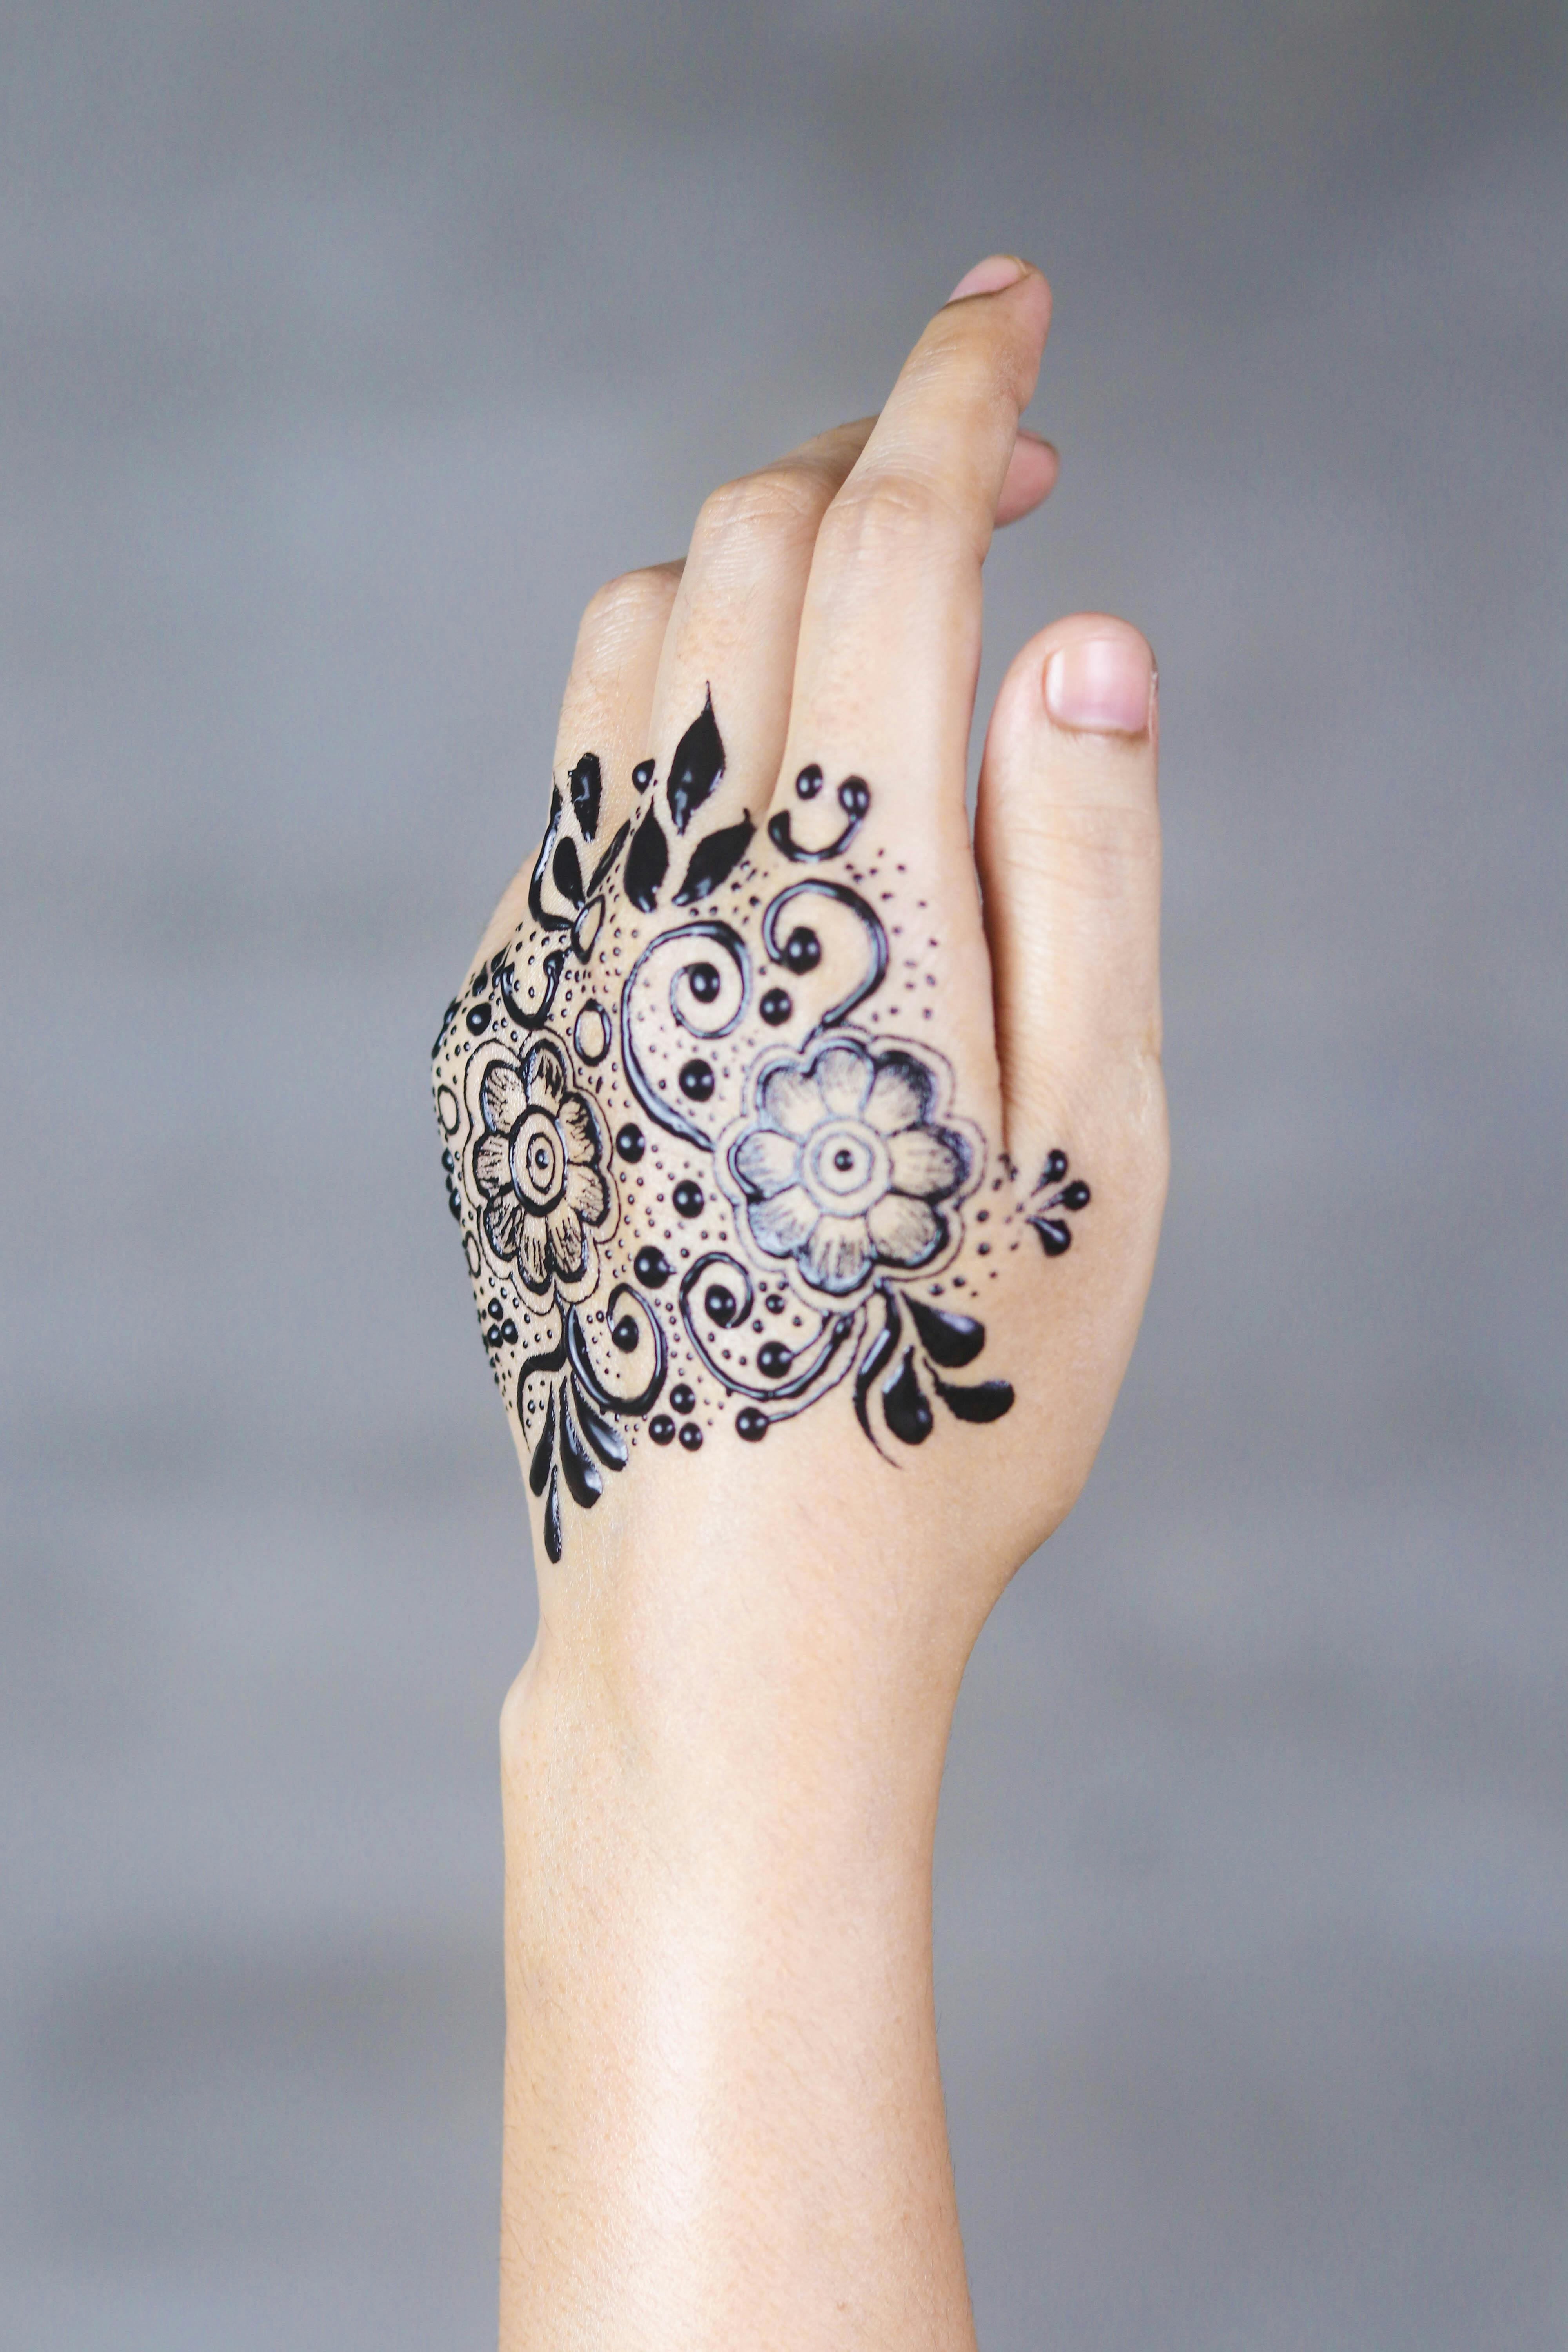 Amazing detail of the mehndi design and the Indian wedding ring | Photo  190802